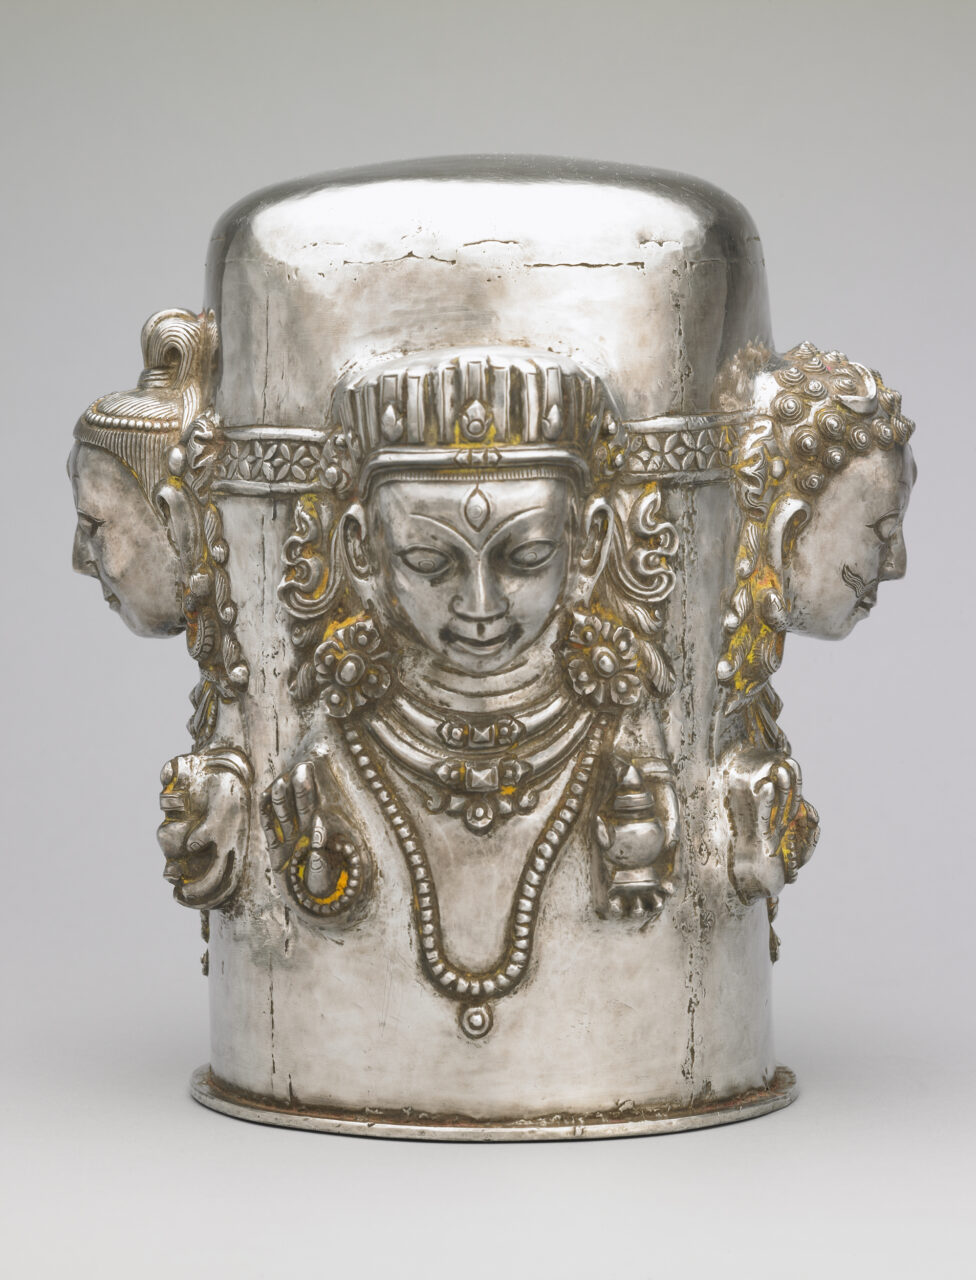 Silver cylindrical object with faces of four figures in relief at cardinal points